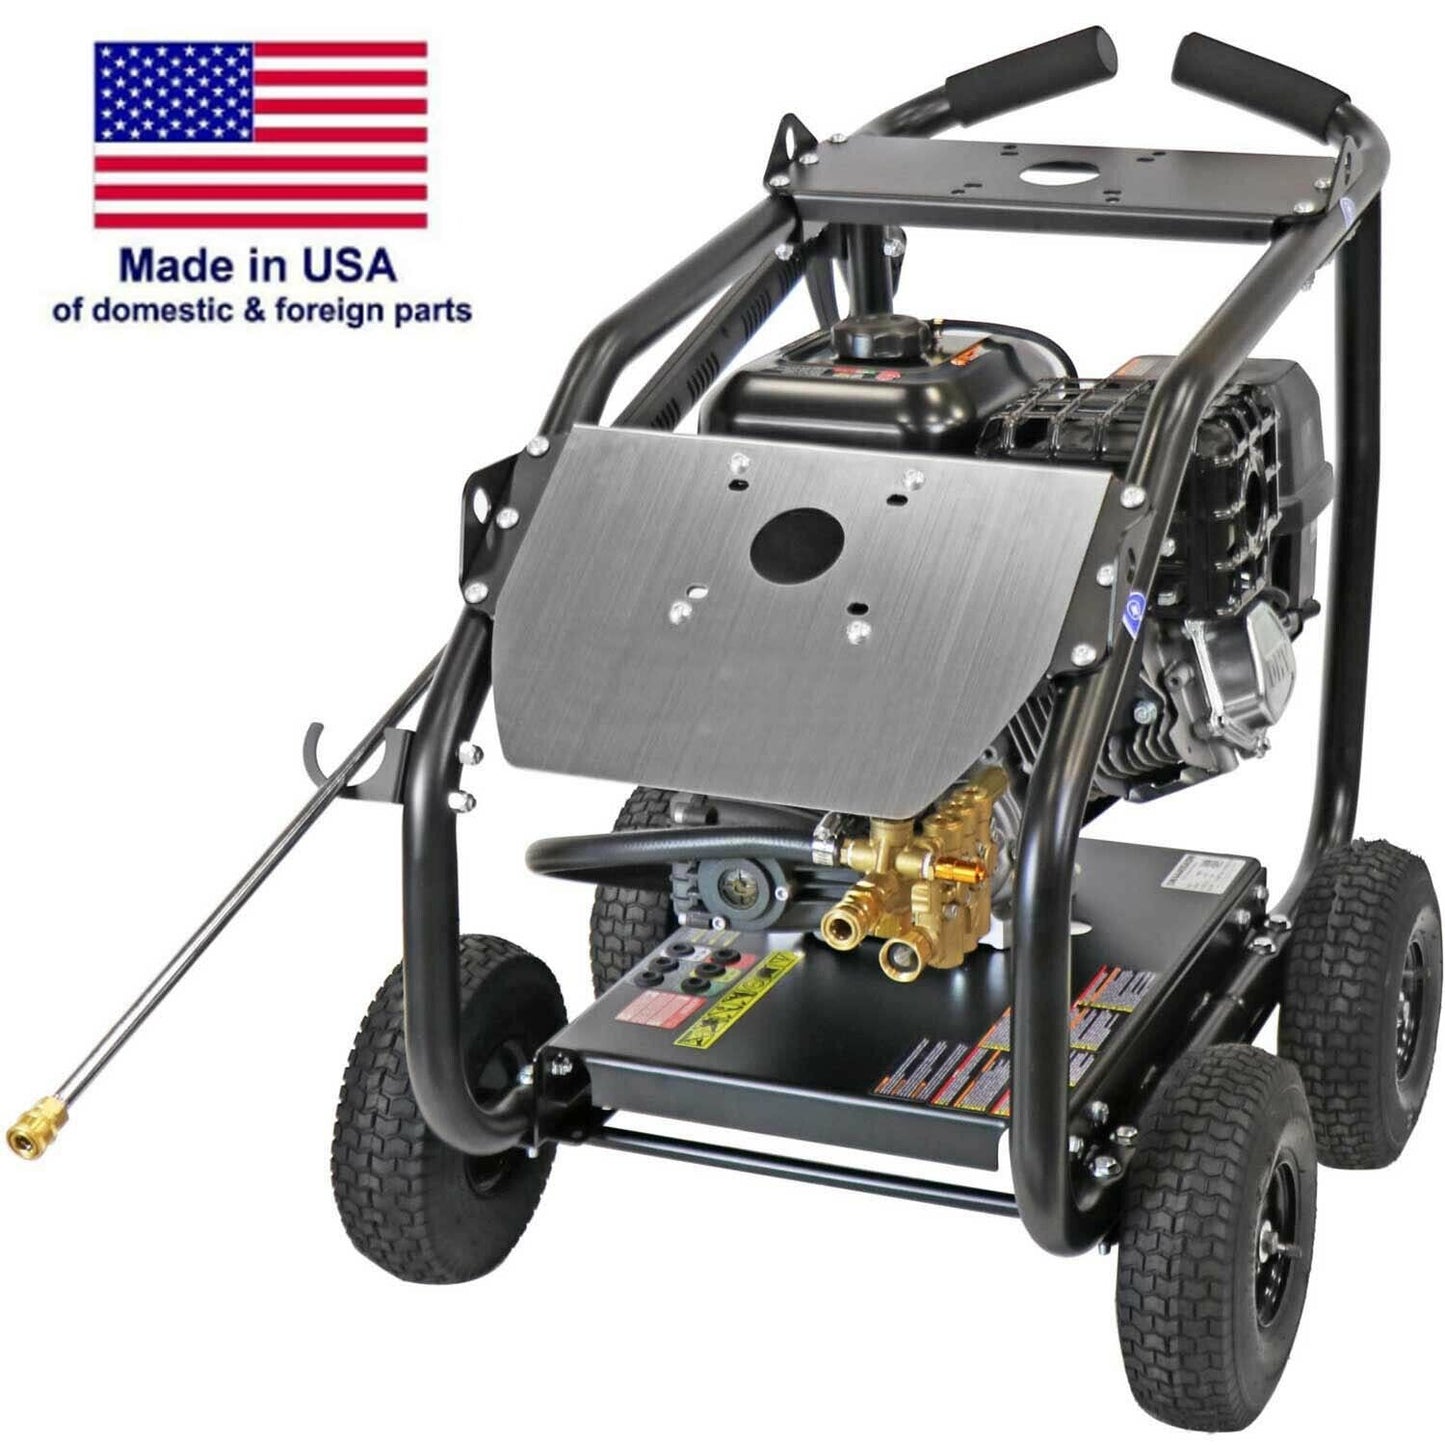 Gas Pressure Washer - Cold Water - 4400 PSI - 4 GPM - AAA Pump - Roll Cage